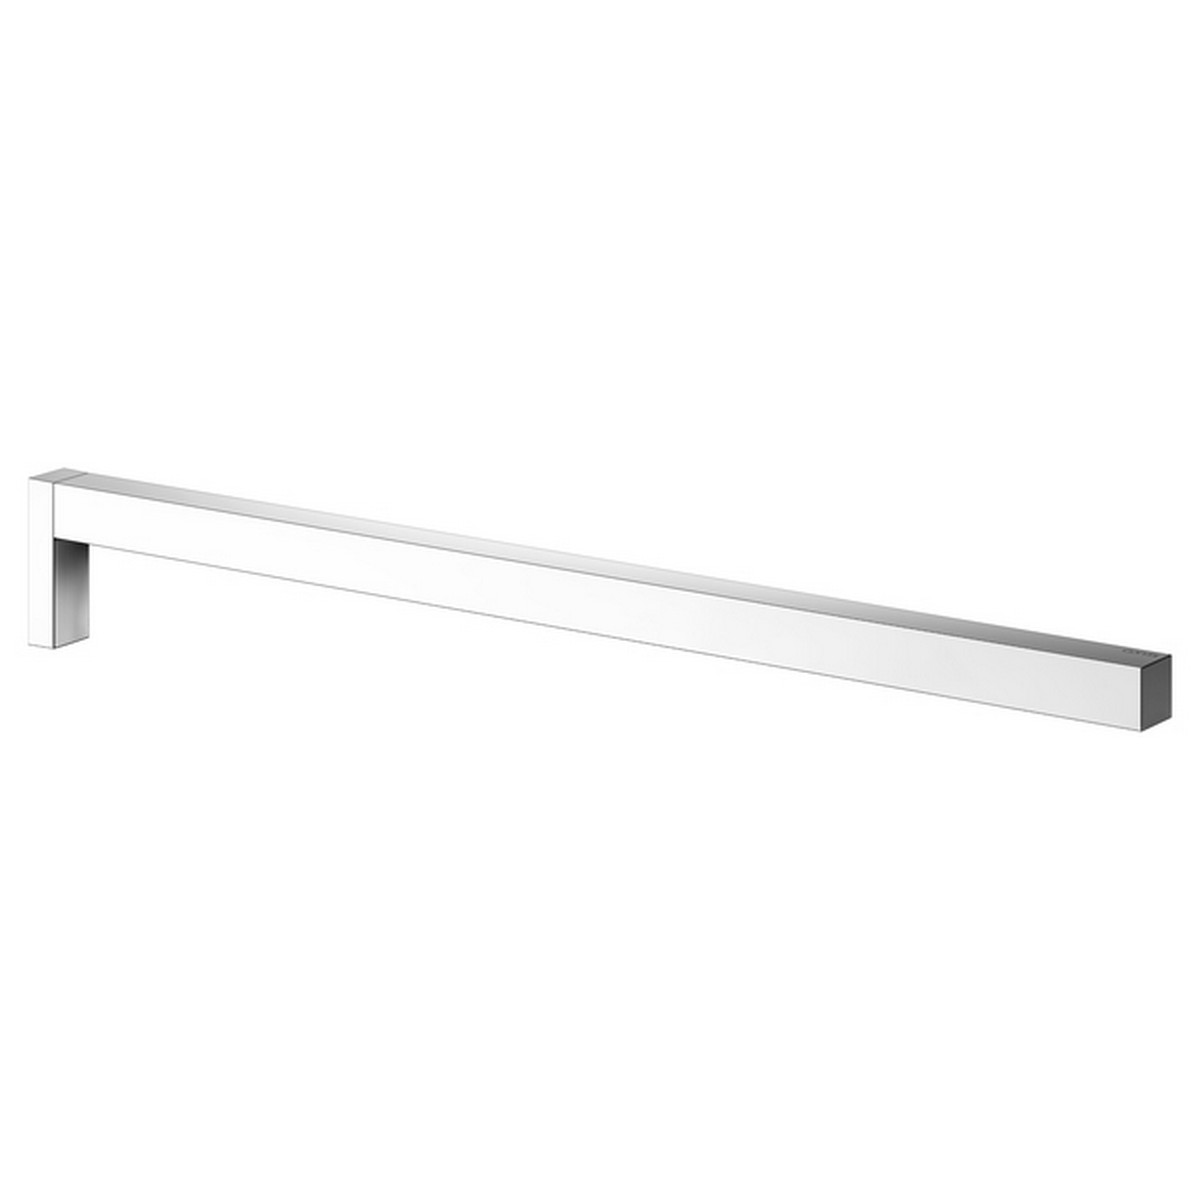 KEUCO 19120010000 EDITION 90 SQUARE 18 INCH WALL MOUNTED SINGLE TOWEL HOLDER IN POLISHED CHROME